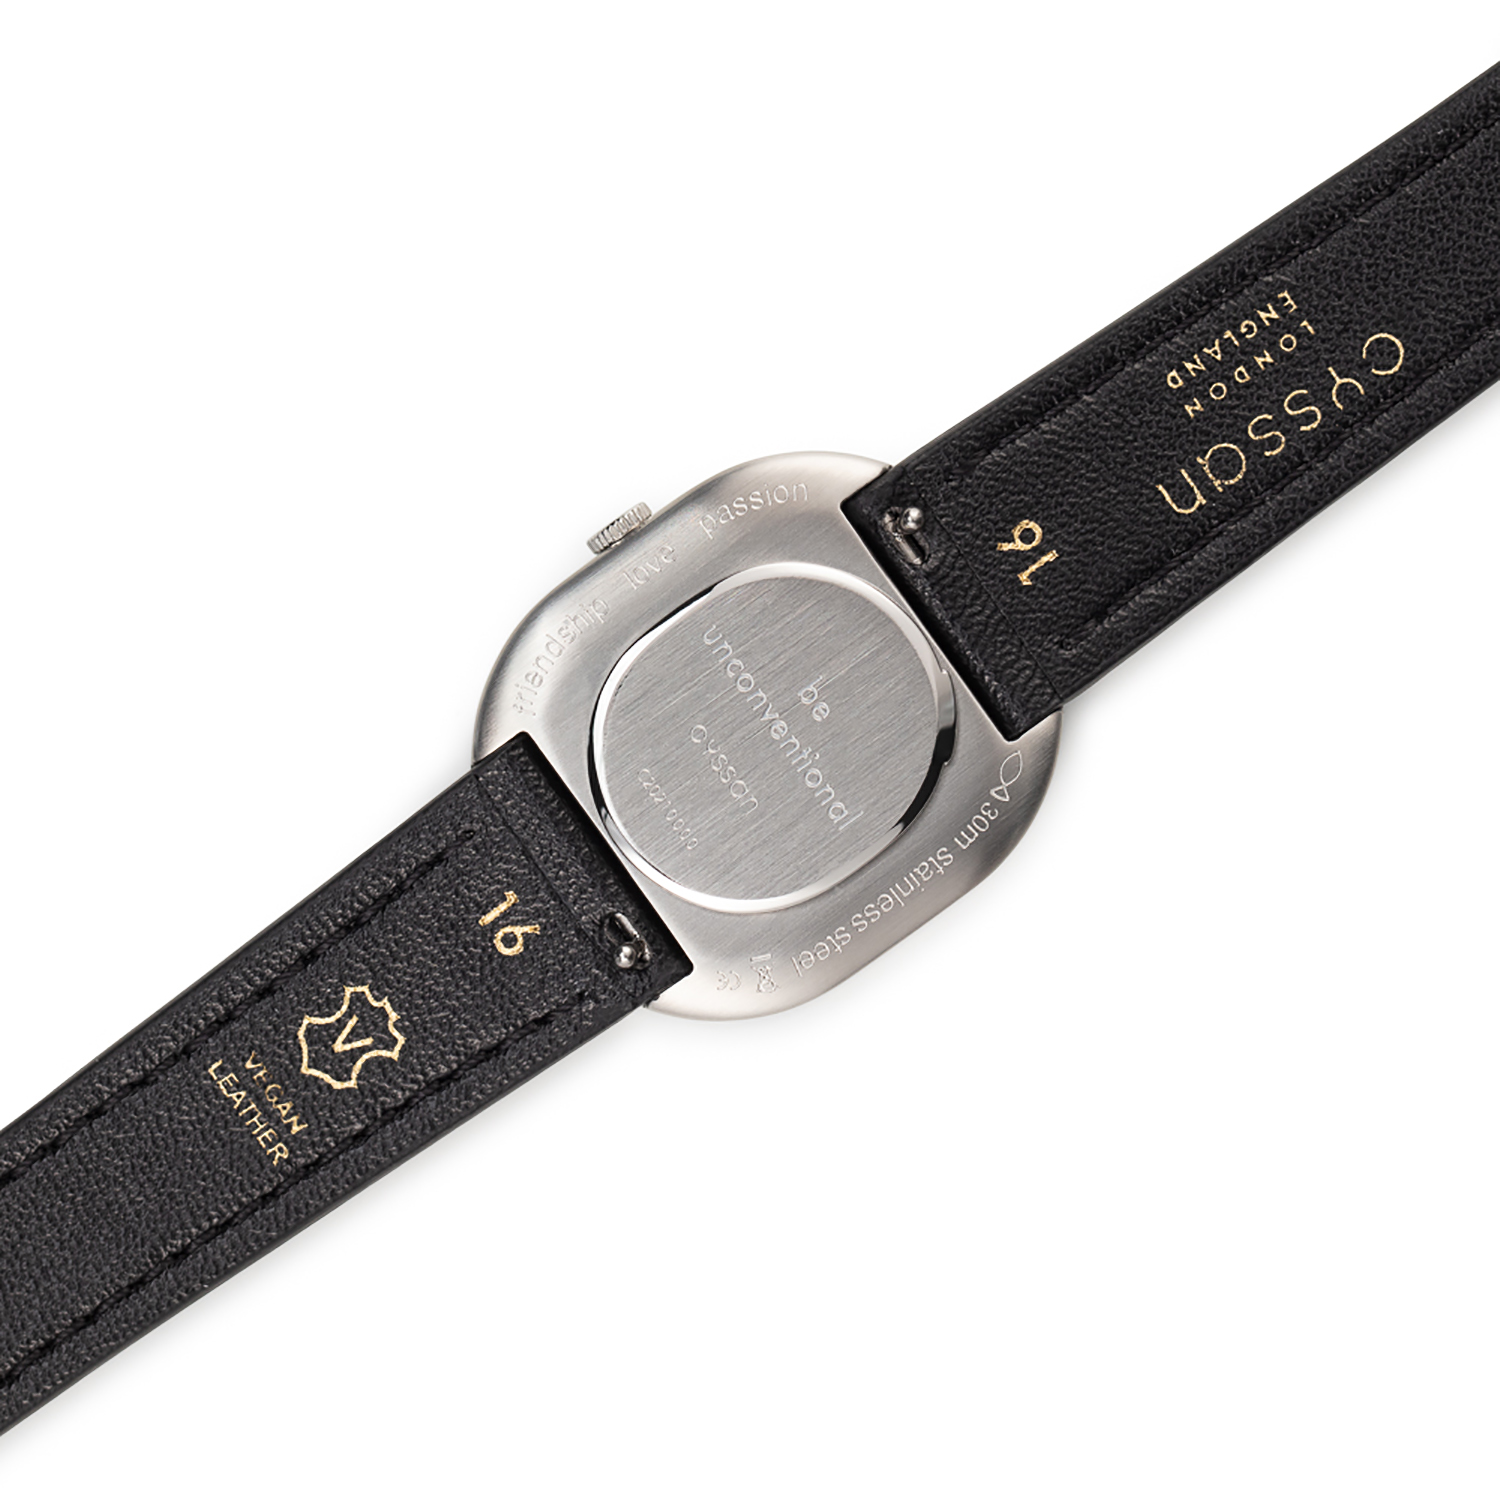 engraved watch case with teh words be unconventional and a black vegan leather strap